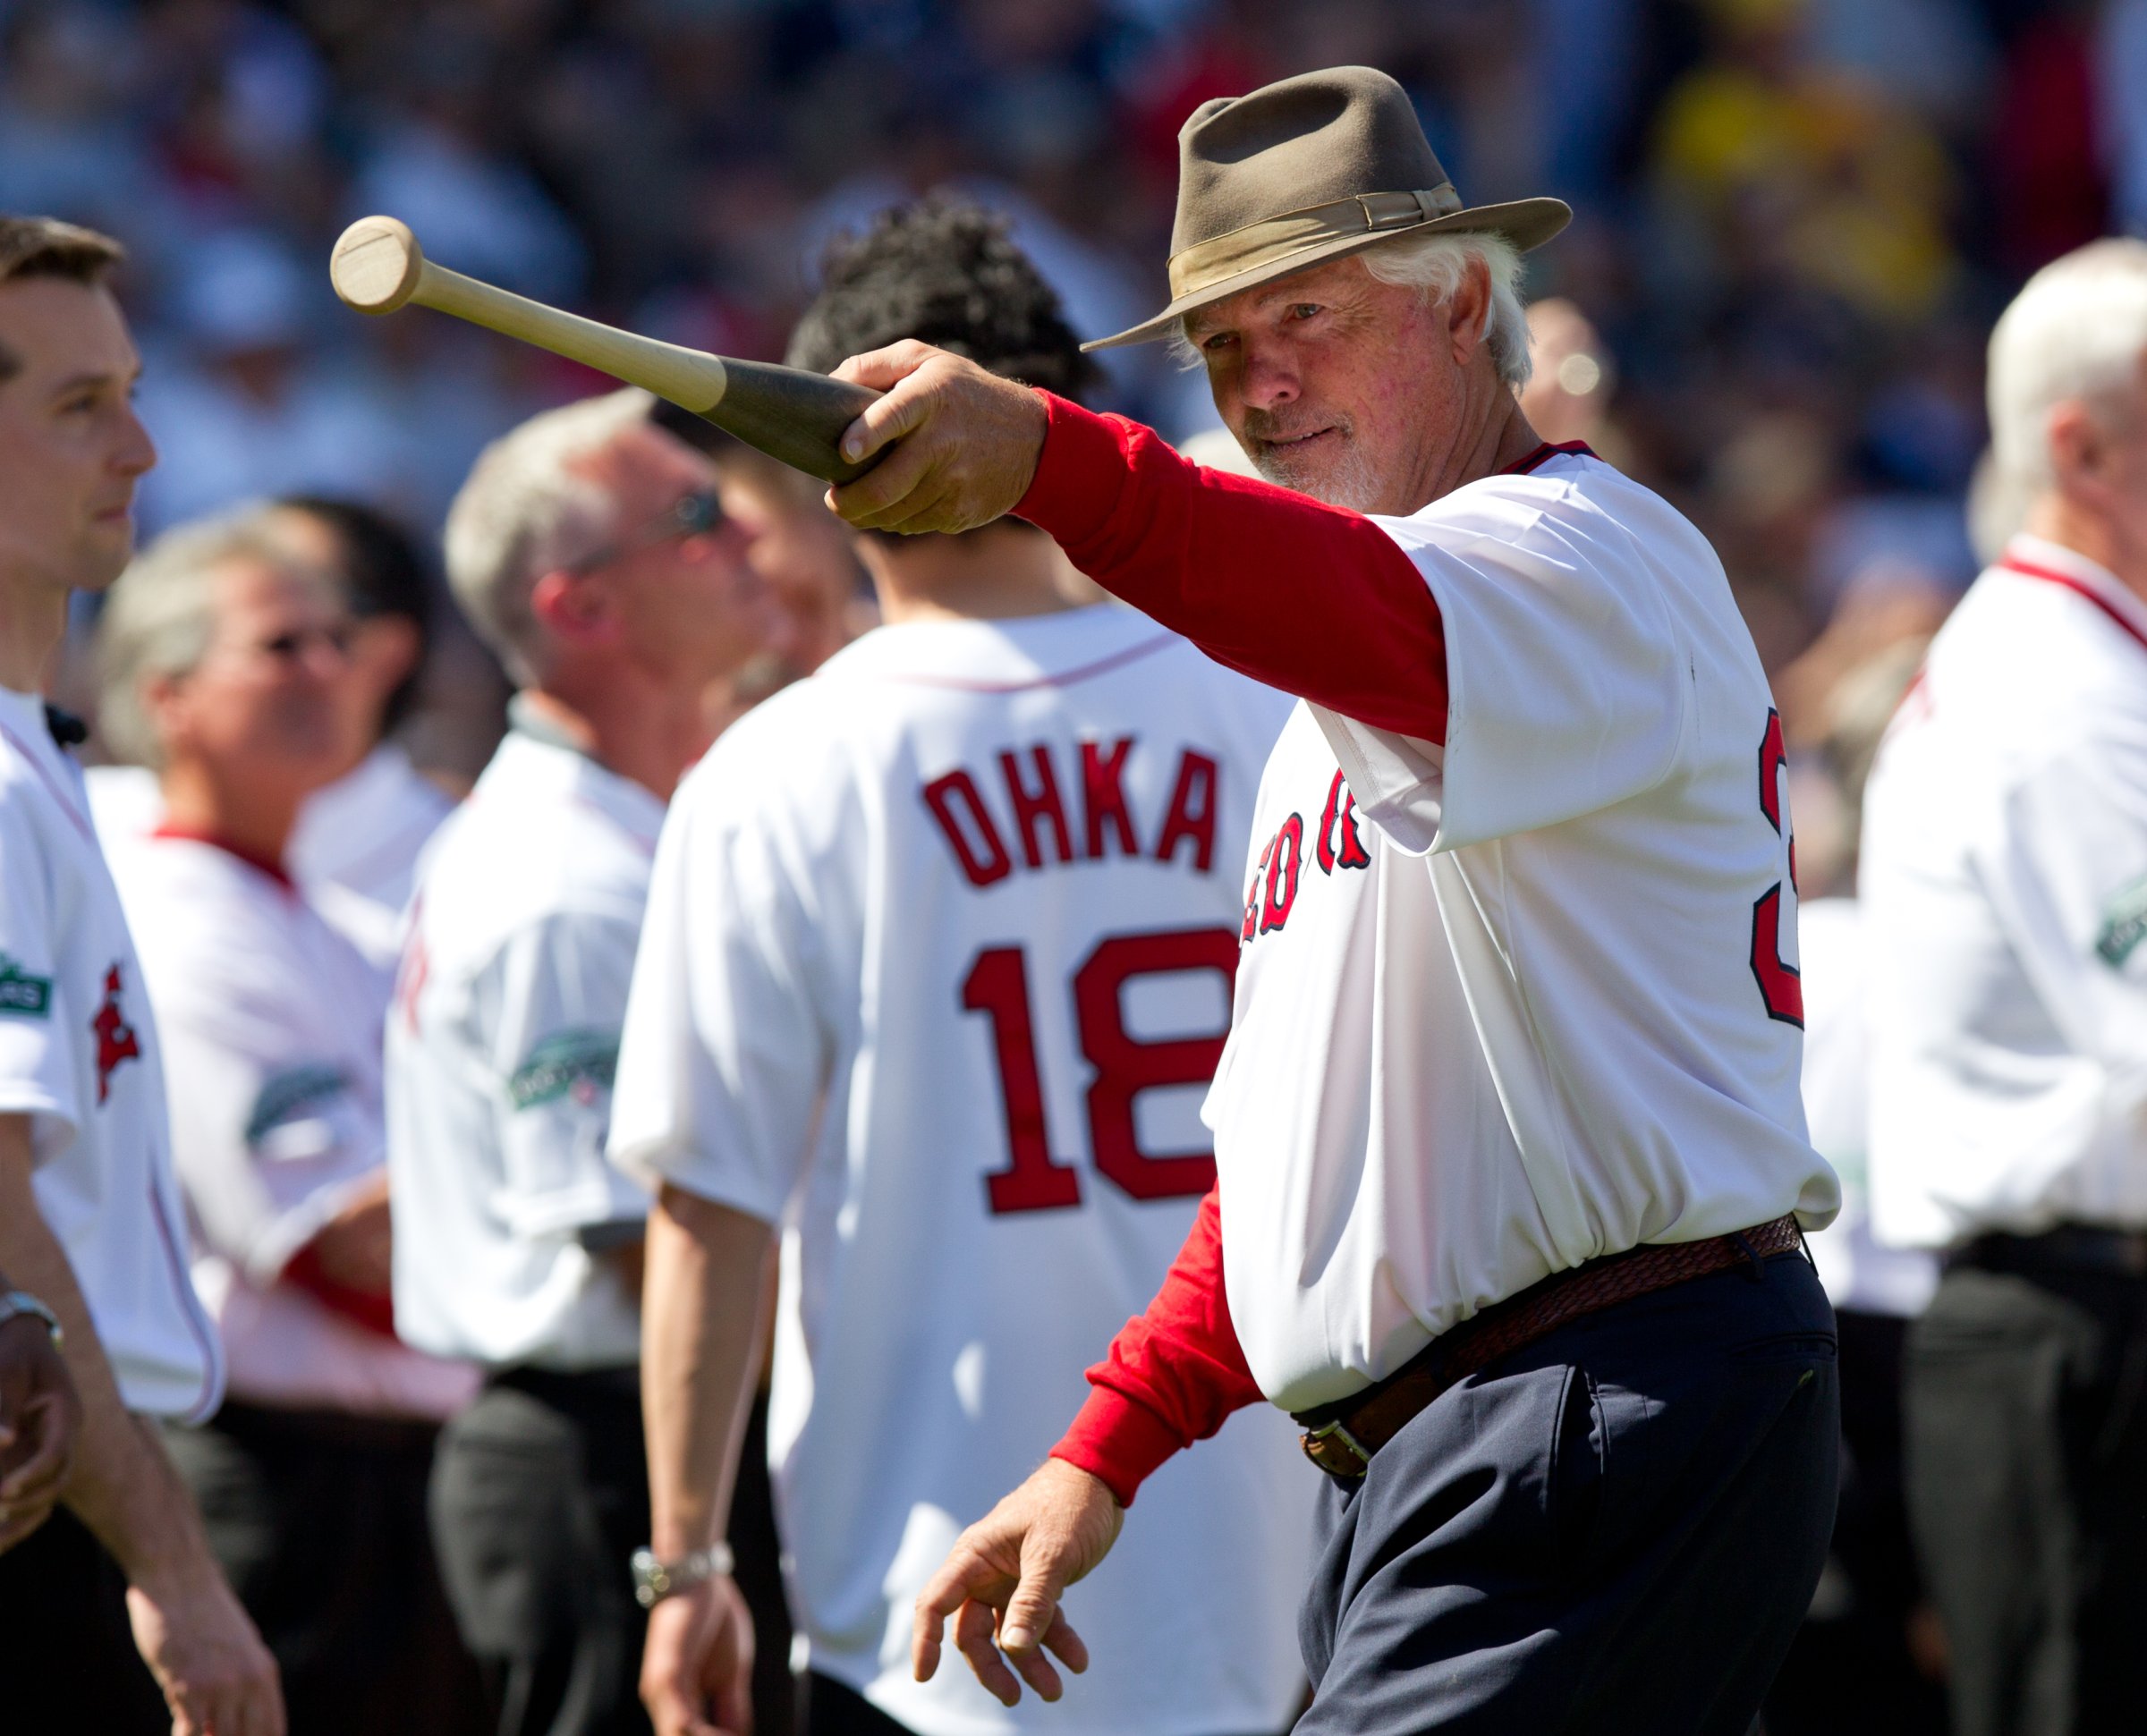 Former Boston Red Sox pitcher Bill "Spaceman" Lee points to the dugout during ceremonies before the game between the Boston Red Sox and the New York Yankees in Boston, April 20, 2012.